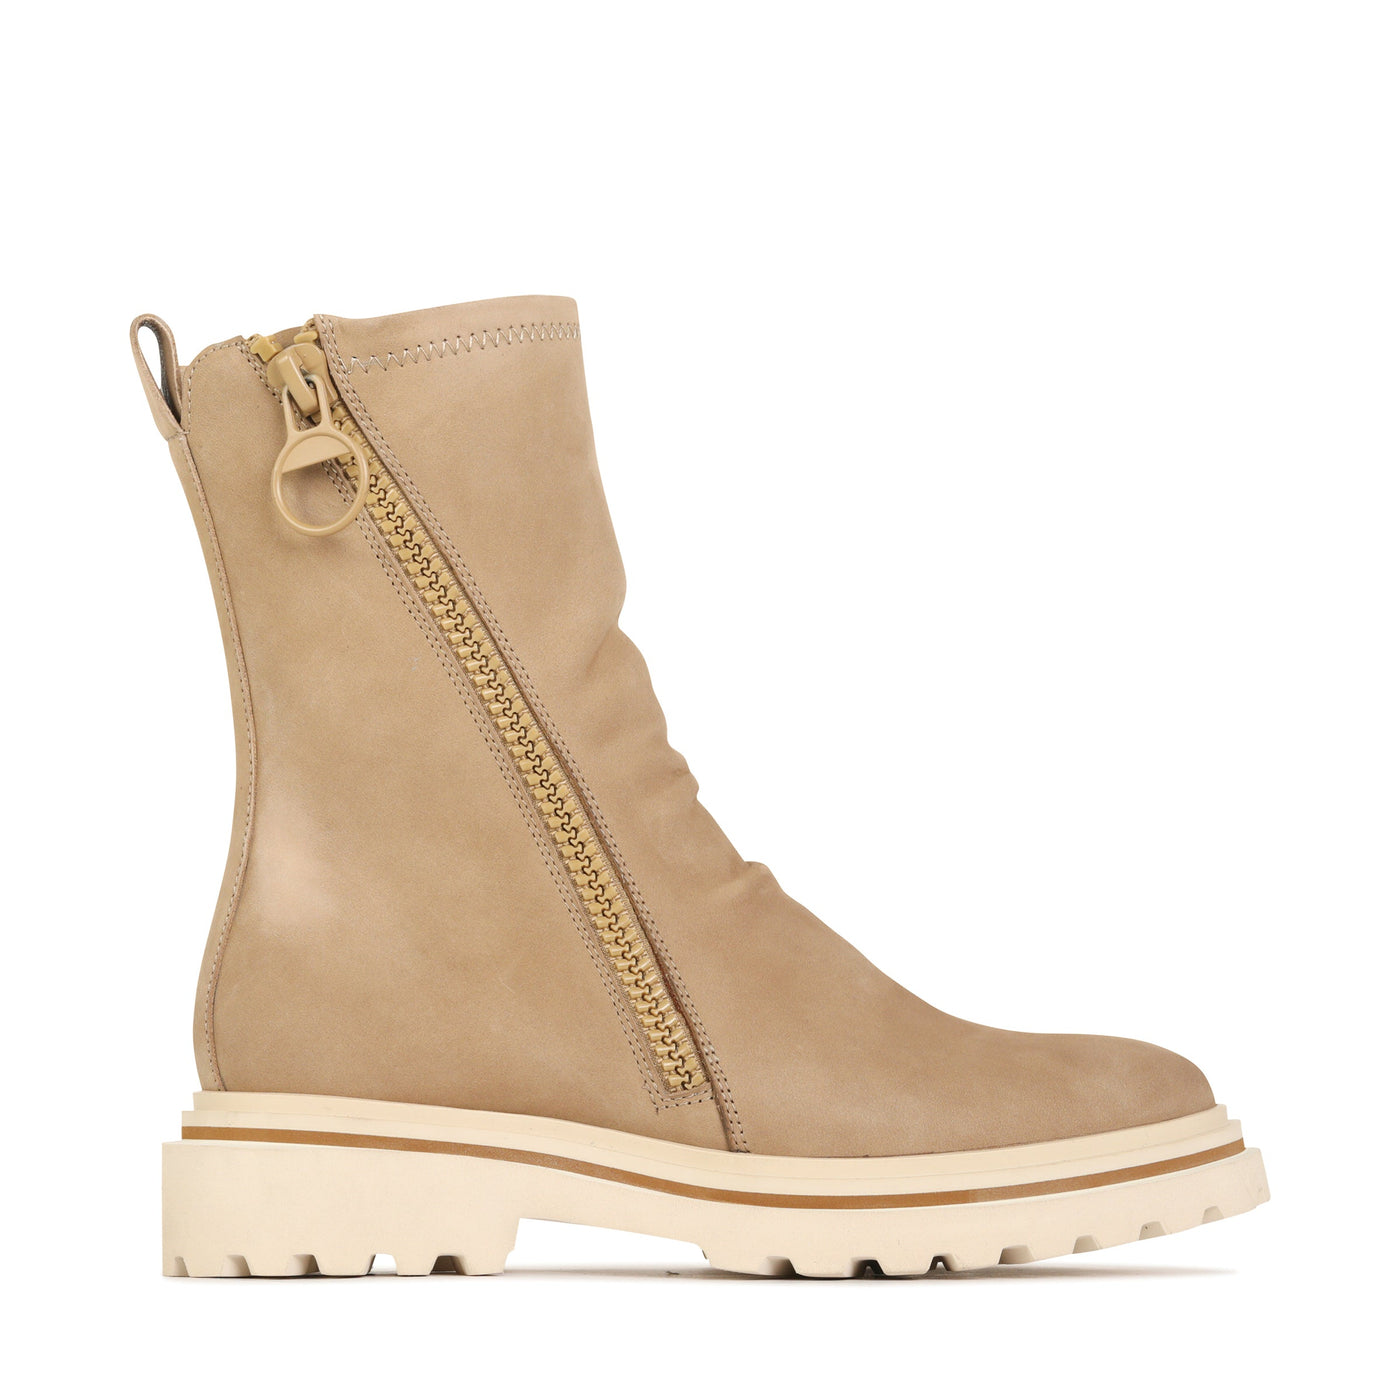 EOS SKARLET DRIFTWOOD - Women Boots - Collective Shoes 